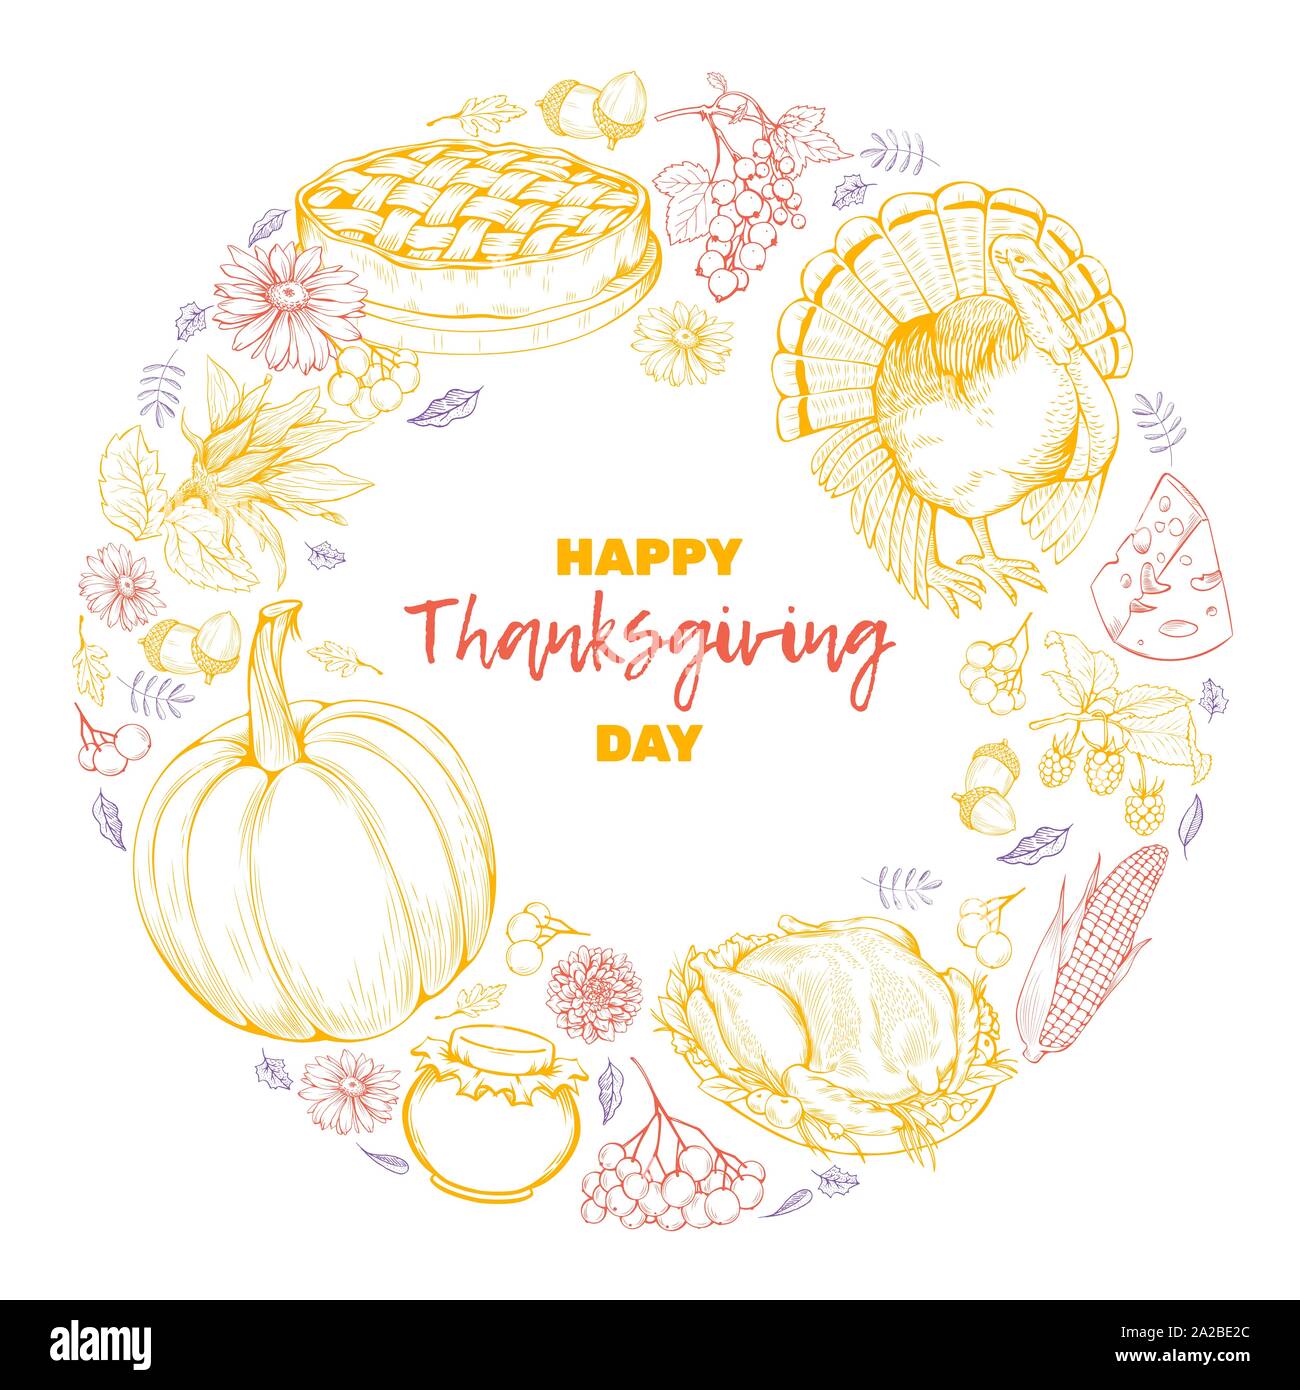 Thanksgiving holiday vector postcard template. Hand drawn autumn festival symbols in round frame with lettering isolated on white background. Pumpkin, turkey, pie, vegetables vintage engravings Stock Vector